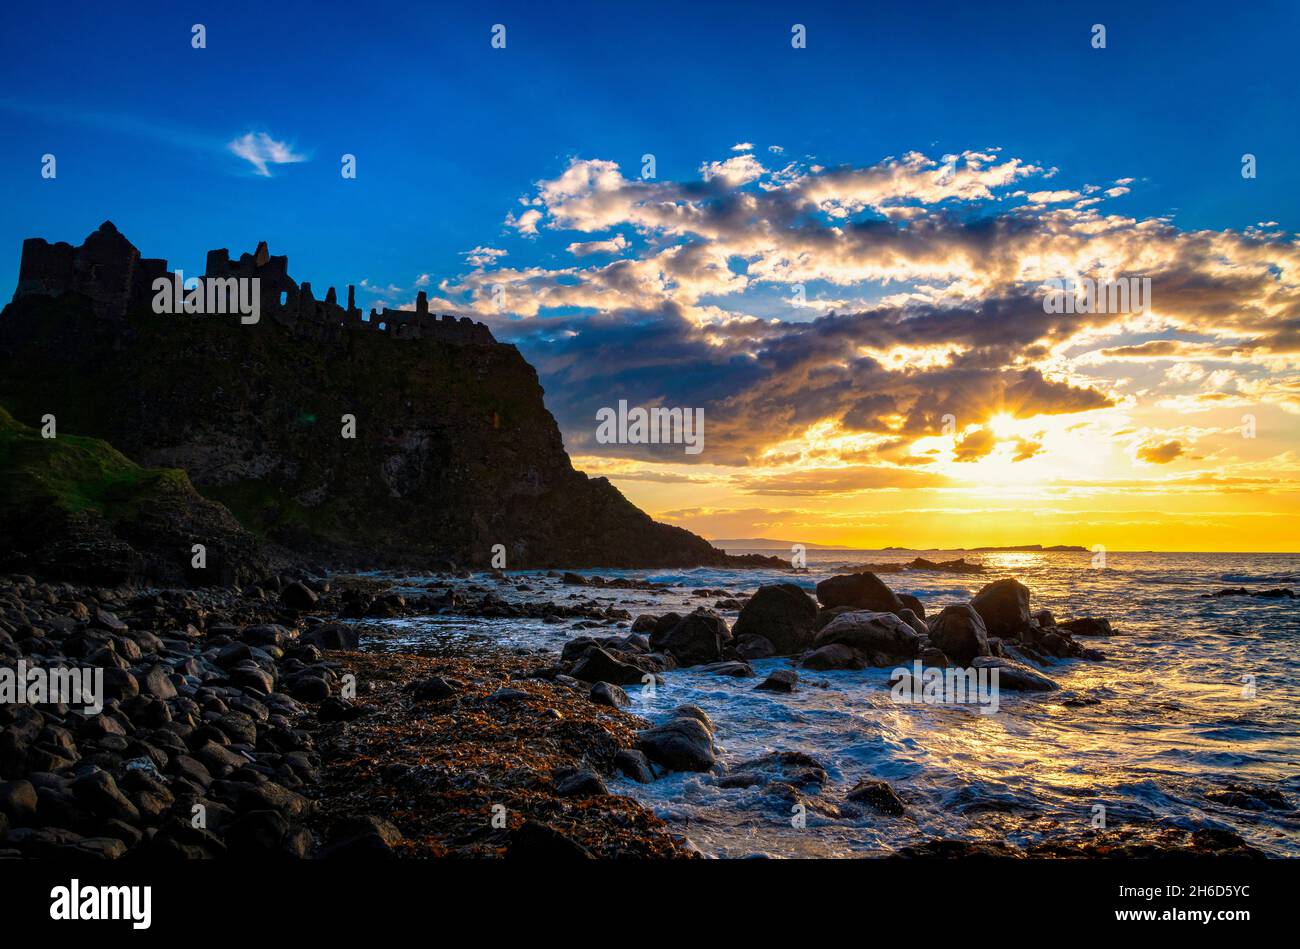 Ruins of Dunluce castle silhouetted by the sunsetting on the Irish coast Stock Photo